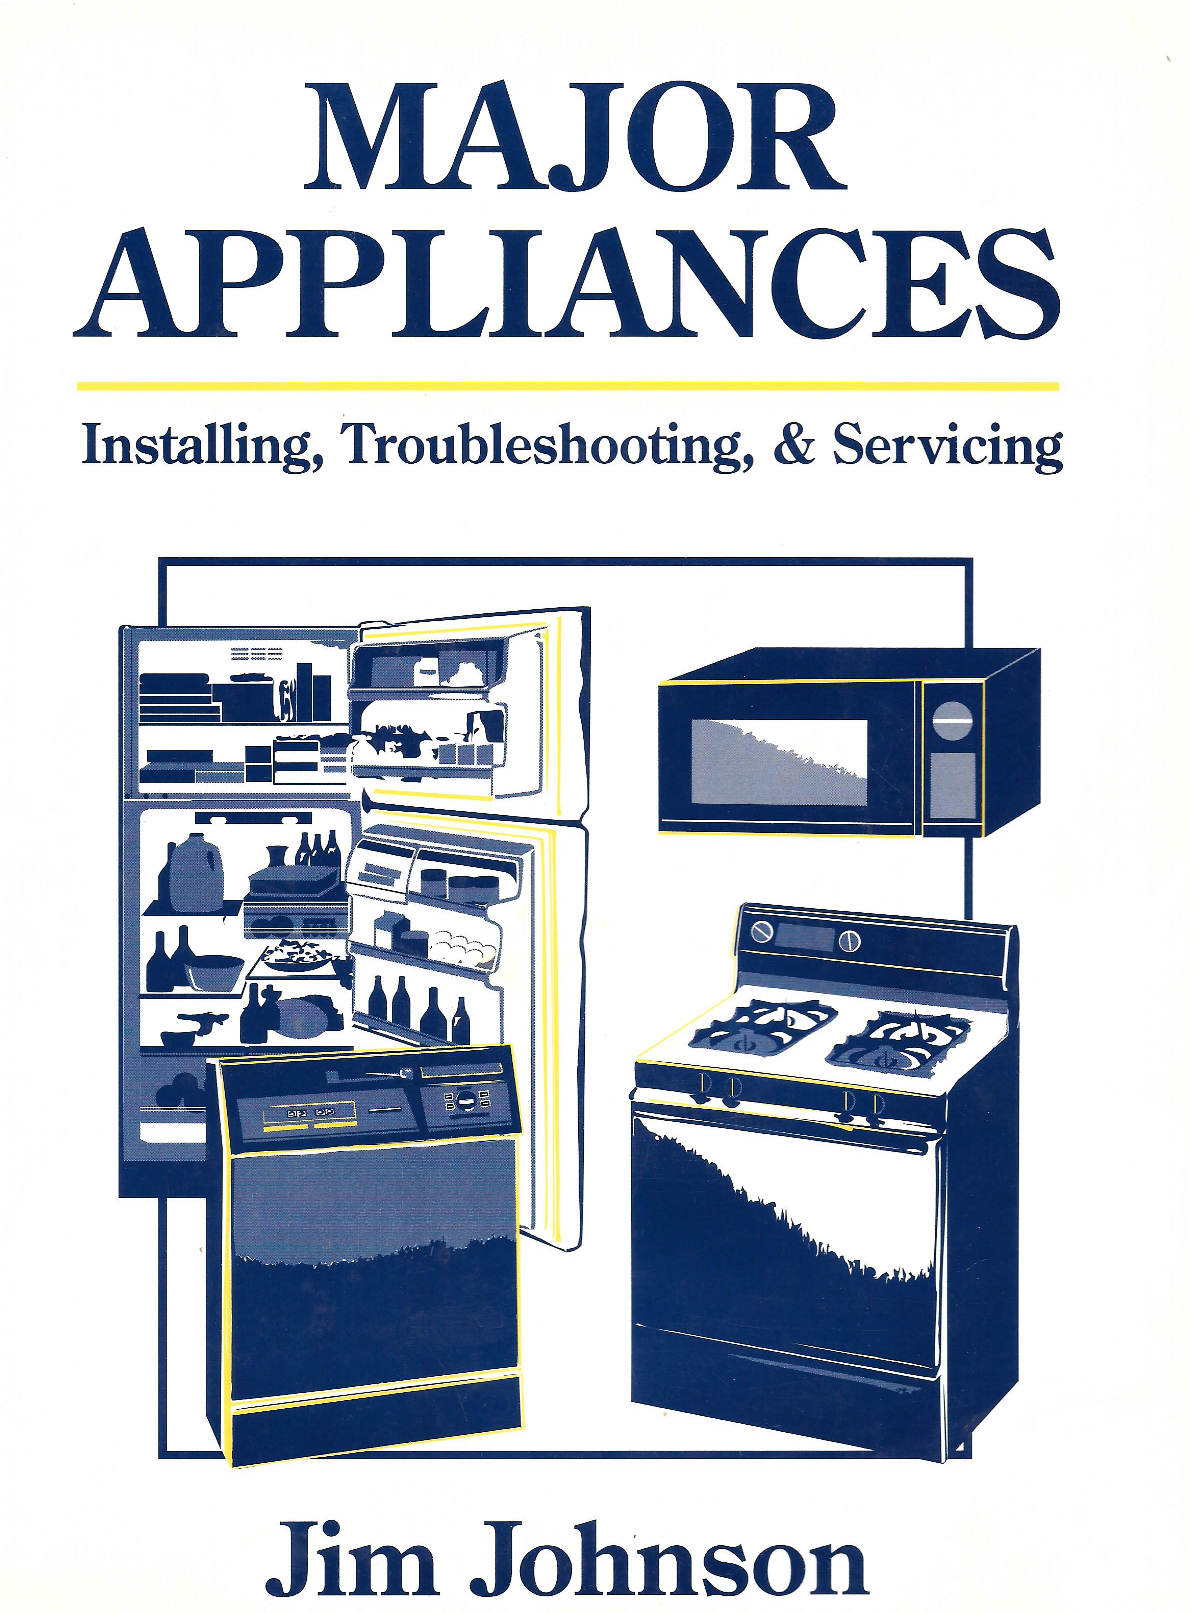 Major Appliances - Installing, Troubleshooting and Servicing